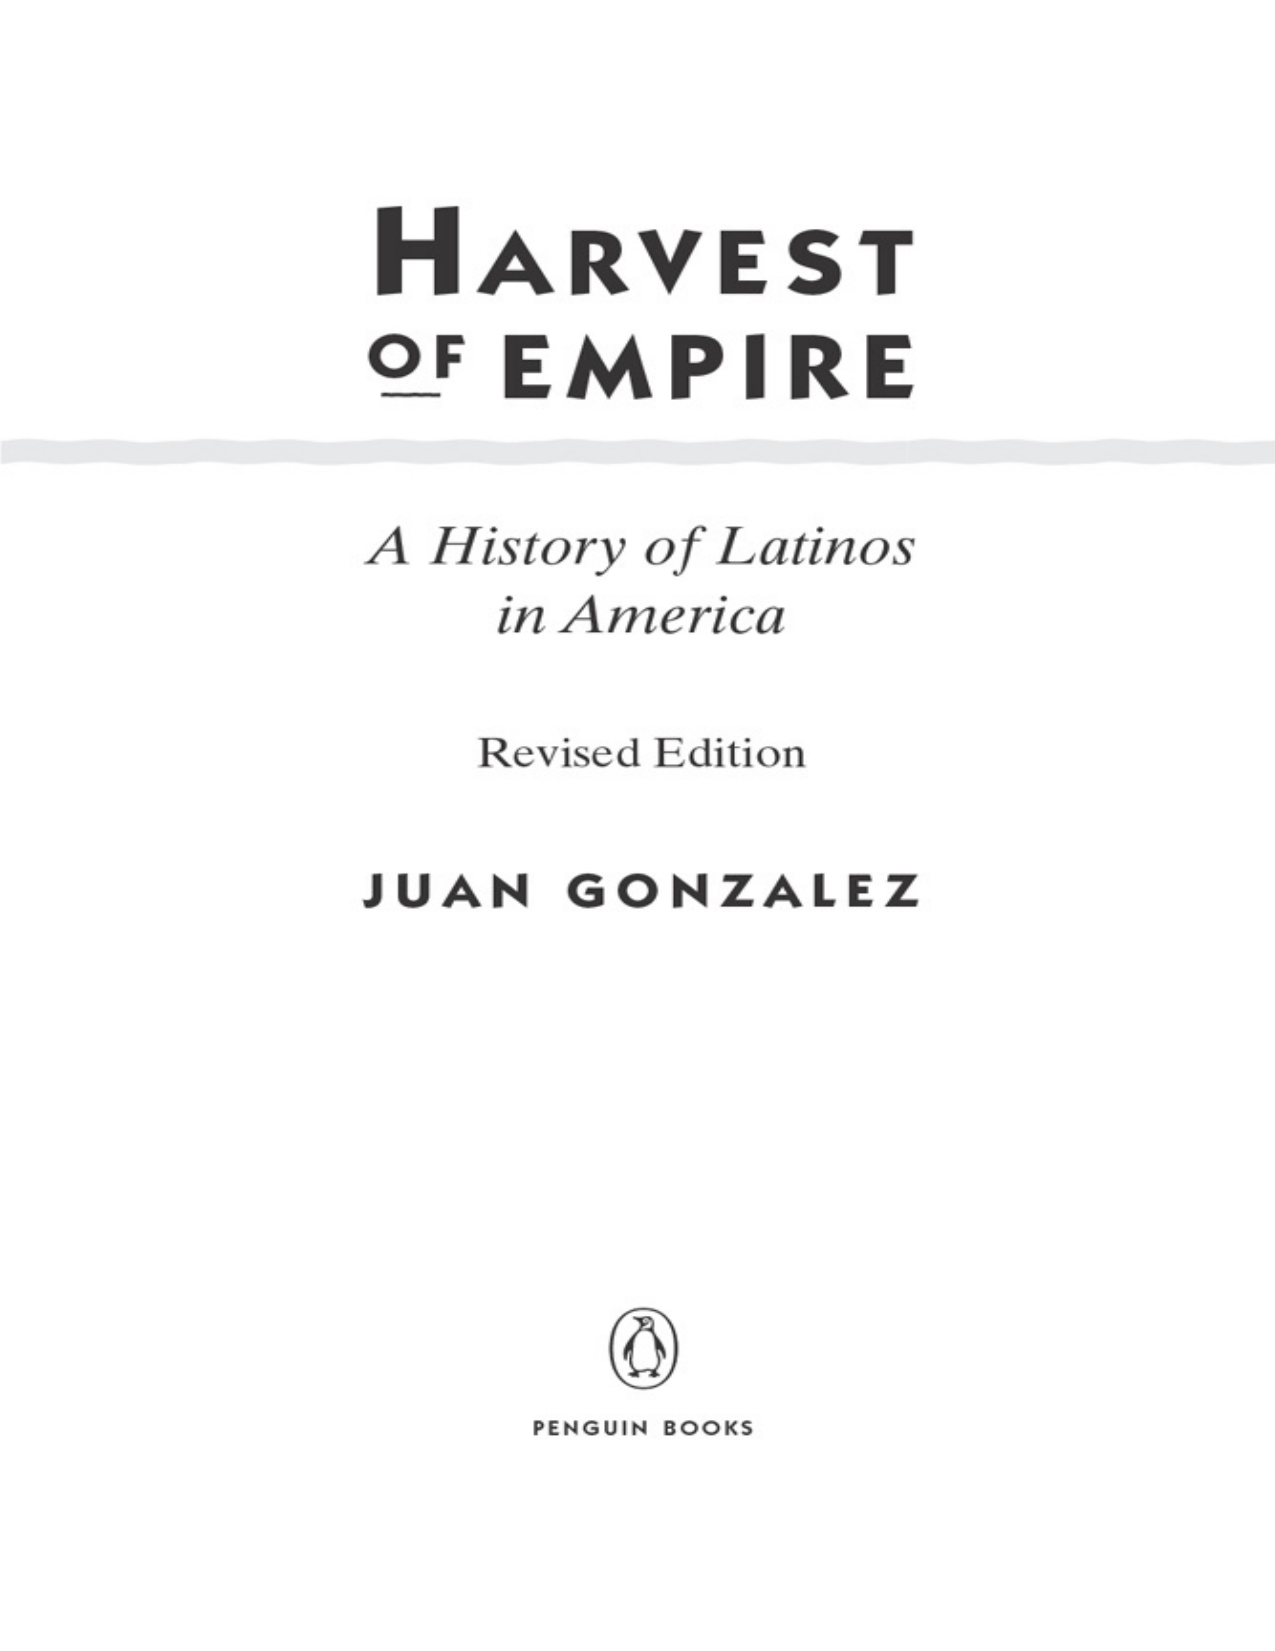 Juan Gonzalez - Harvest of Empire A History of Latinos in America (2011, Penguin Books)